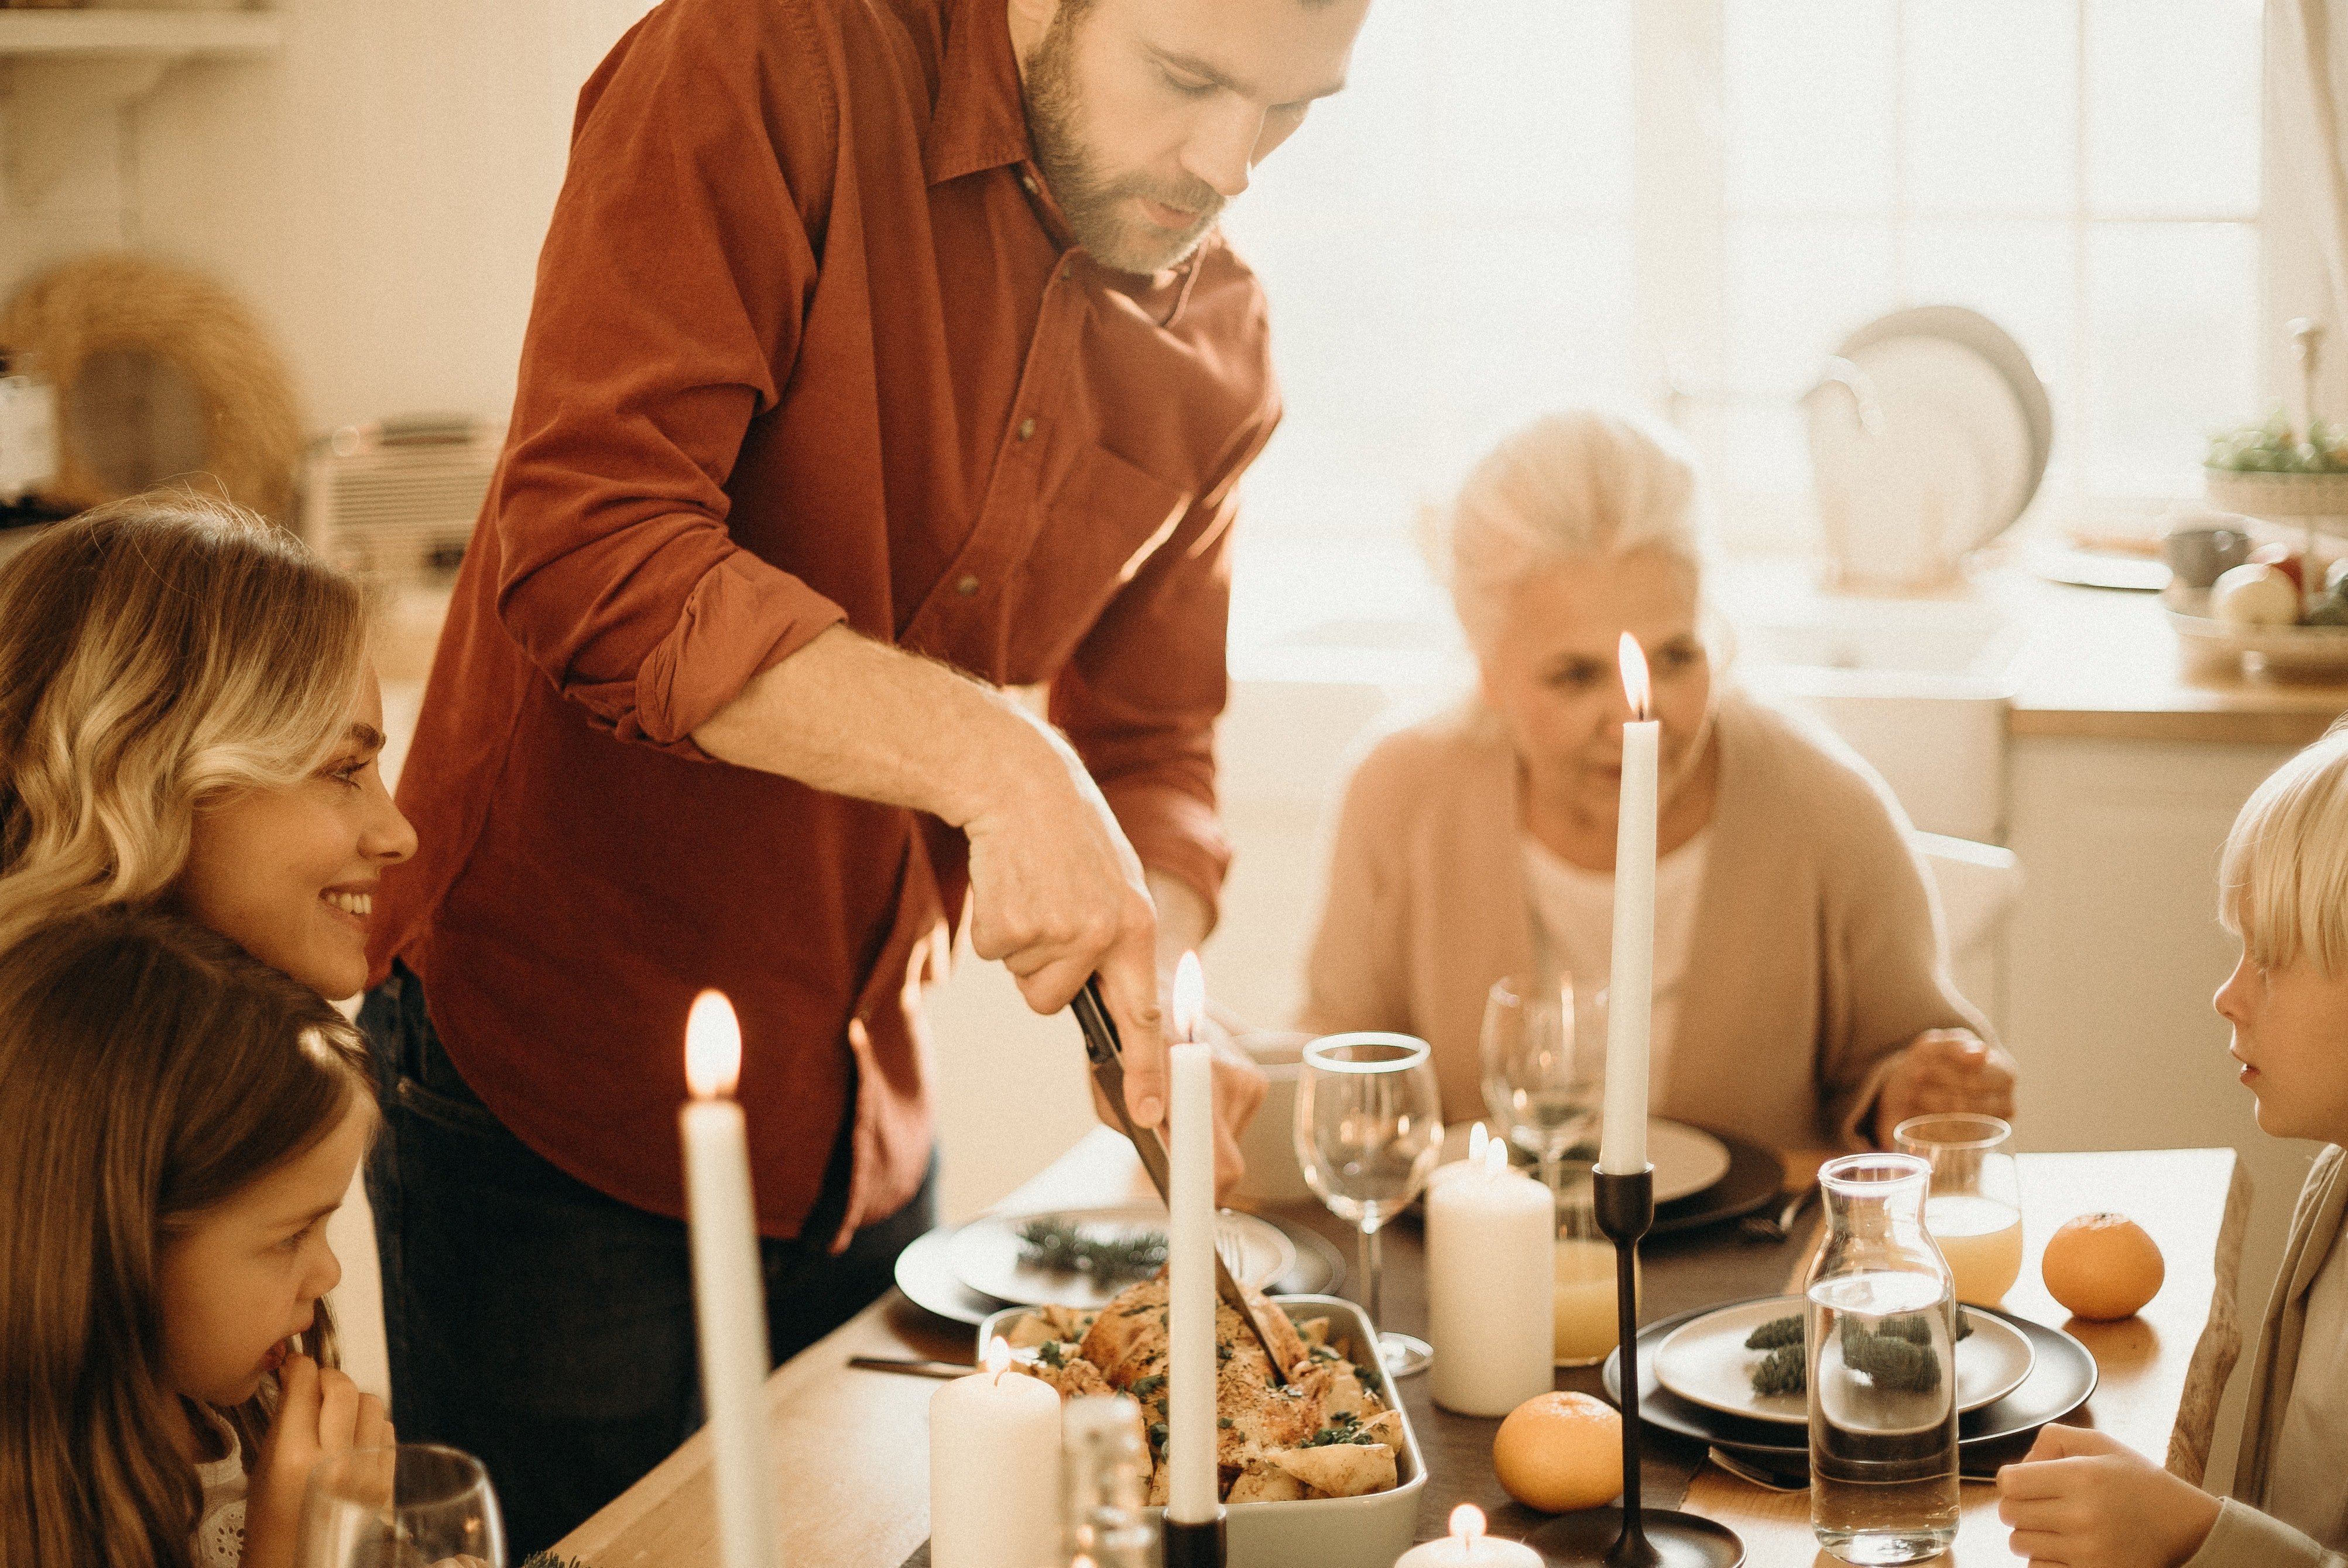 The Redditor's mom was excited about having them over for Easter. | Source: Pexels